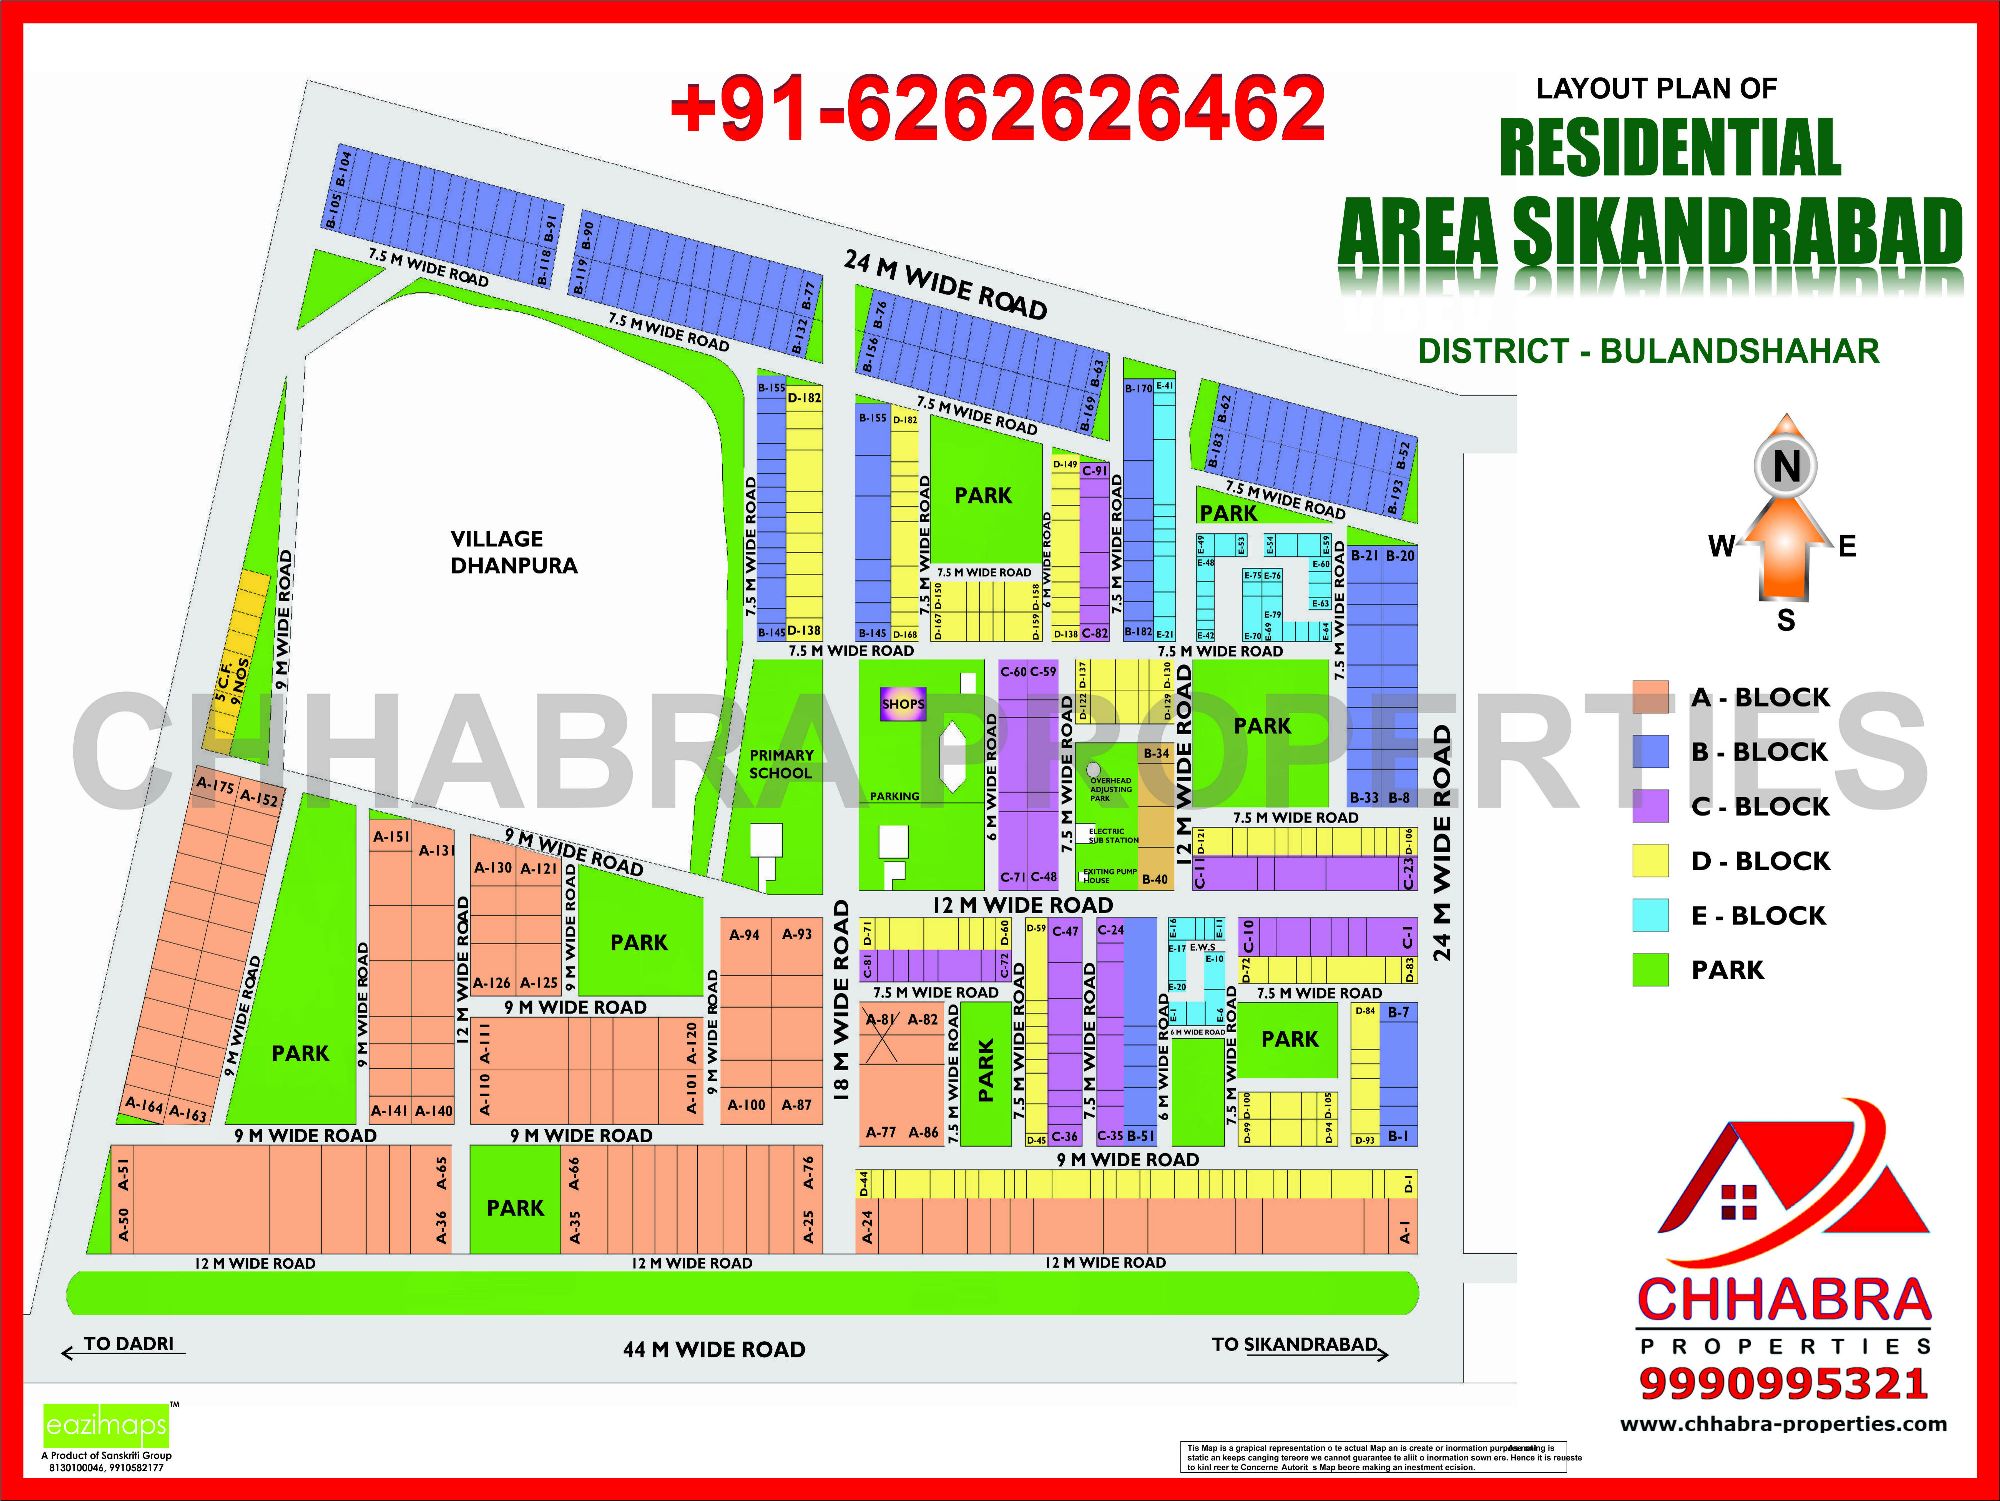 layout plan for residential area sinkandrabad hd map